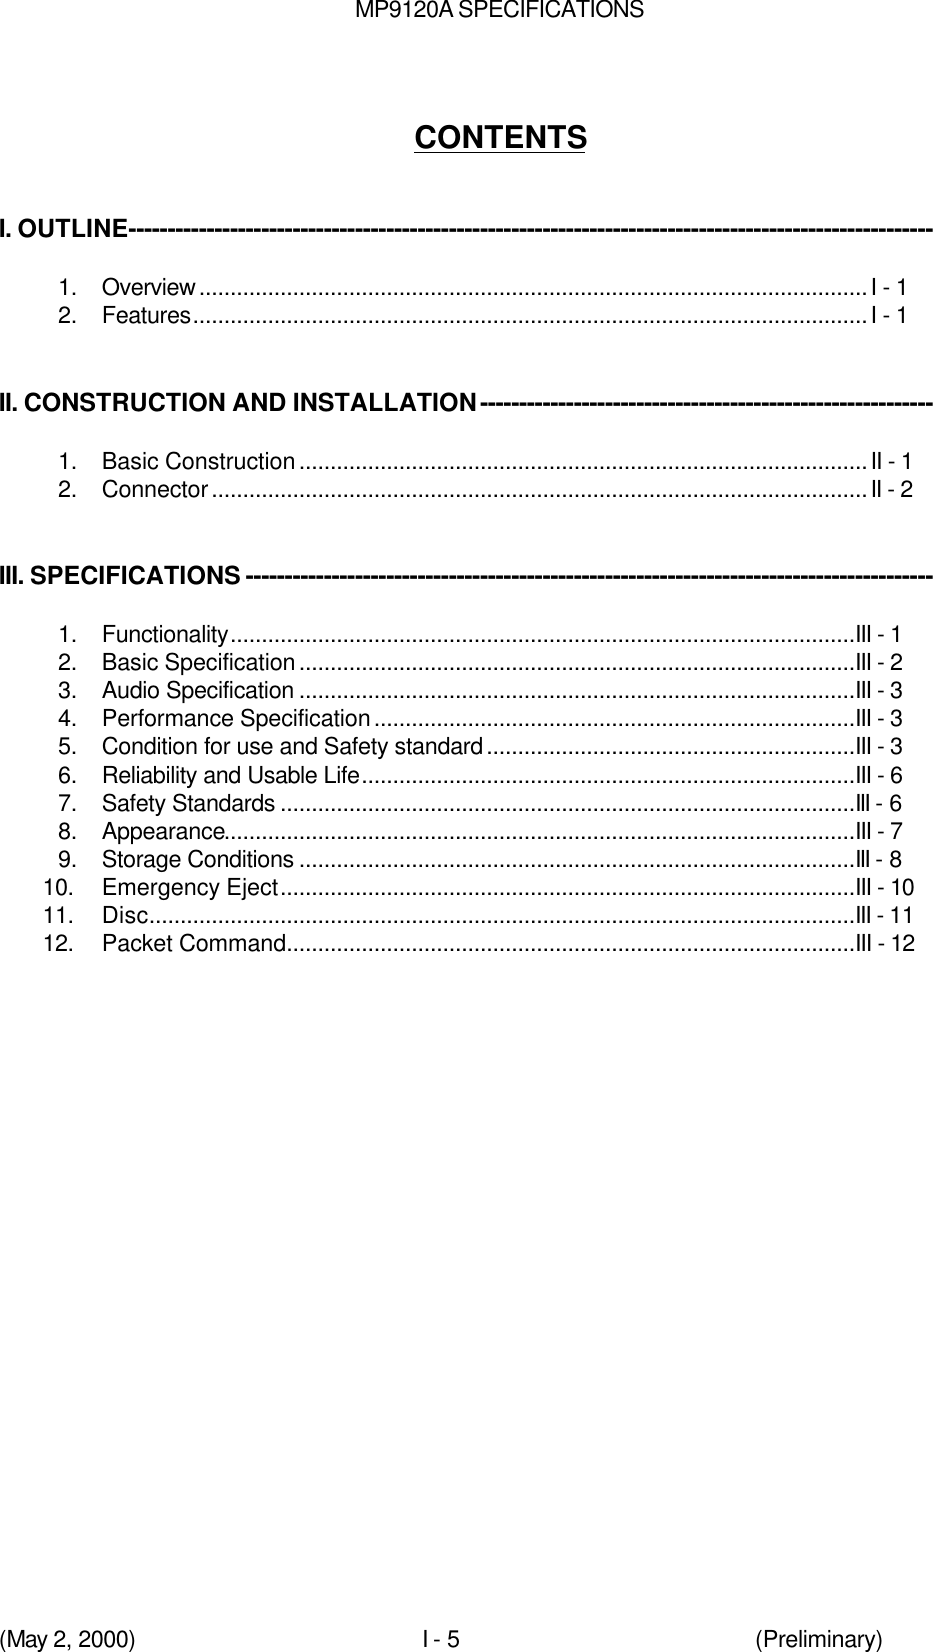 MP9120A SPECIFICATIONS(May 2, 2000)I - 5 (Preliminary)CONTENTSI. OUTLINE-------------------------------------------------------------------------------------------------------1.  Overview...........................................................................................................I - 12.  Features............................................................................................................I - 1II. CONSTRUCTION AND INSTALLATION----------------------------------------------------------1.  Basic Construction...........................................................................................II - 12.  Connector.........................................................................................................II - 2III. SPECIFICATIONS ----------------------------------------------------------------------------------------1.  Functionality....................................................................................................III - 12.  Basic Specification.........................................................................................III - 23.  Audio Specification .........................................................................................III - 34.  Performance Specification.............................................................................III - 35.  Condition for use and Safety standard...........................................................III - 36.  Reliability and Usable Life...............................................................................III - 67.  Safety Standards ............................................................................................III - 68.  Appearance.....................................................................................................III - 79.  Storage Conditions .........................................................................................III - 810.  Emergency Eject............................................................................................III - 1011.  Disc.................................................................................................................III - 1112.  Packet Command...........................................................................................III - 12